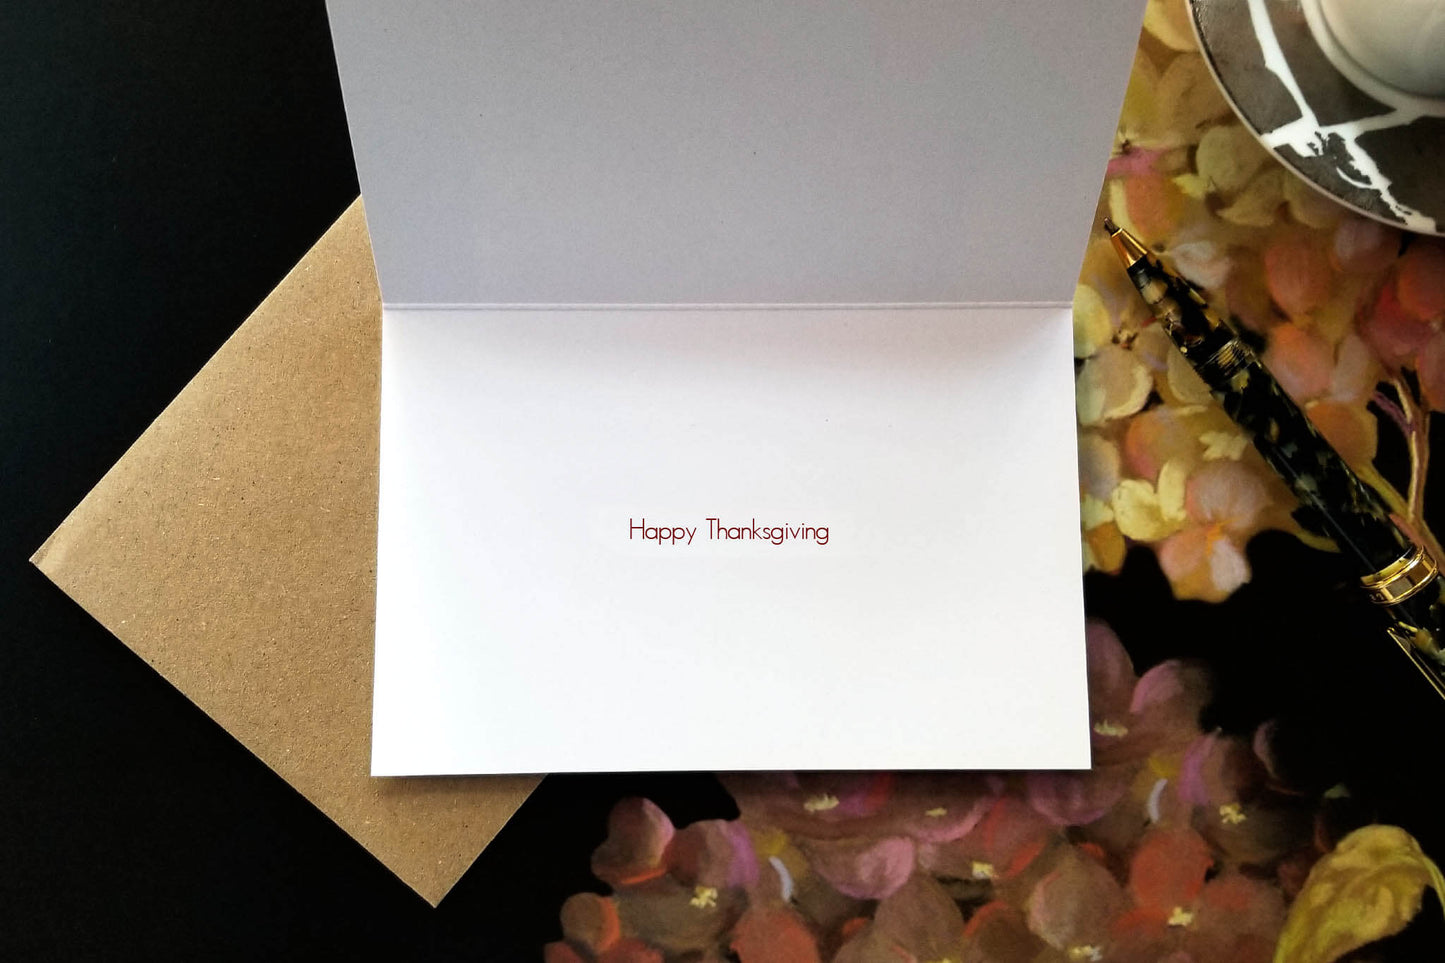 James 1:17 eco Christian greeting card with Happy Thanksgiving inside